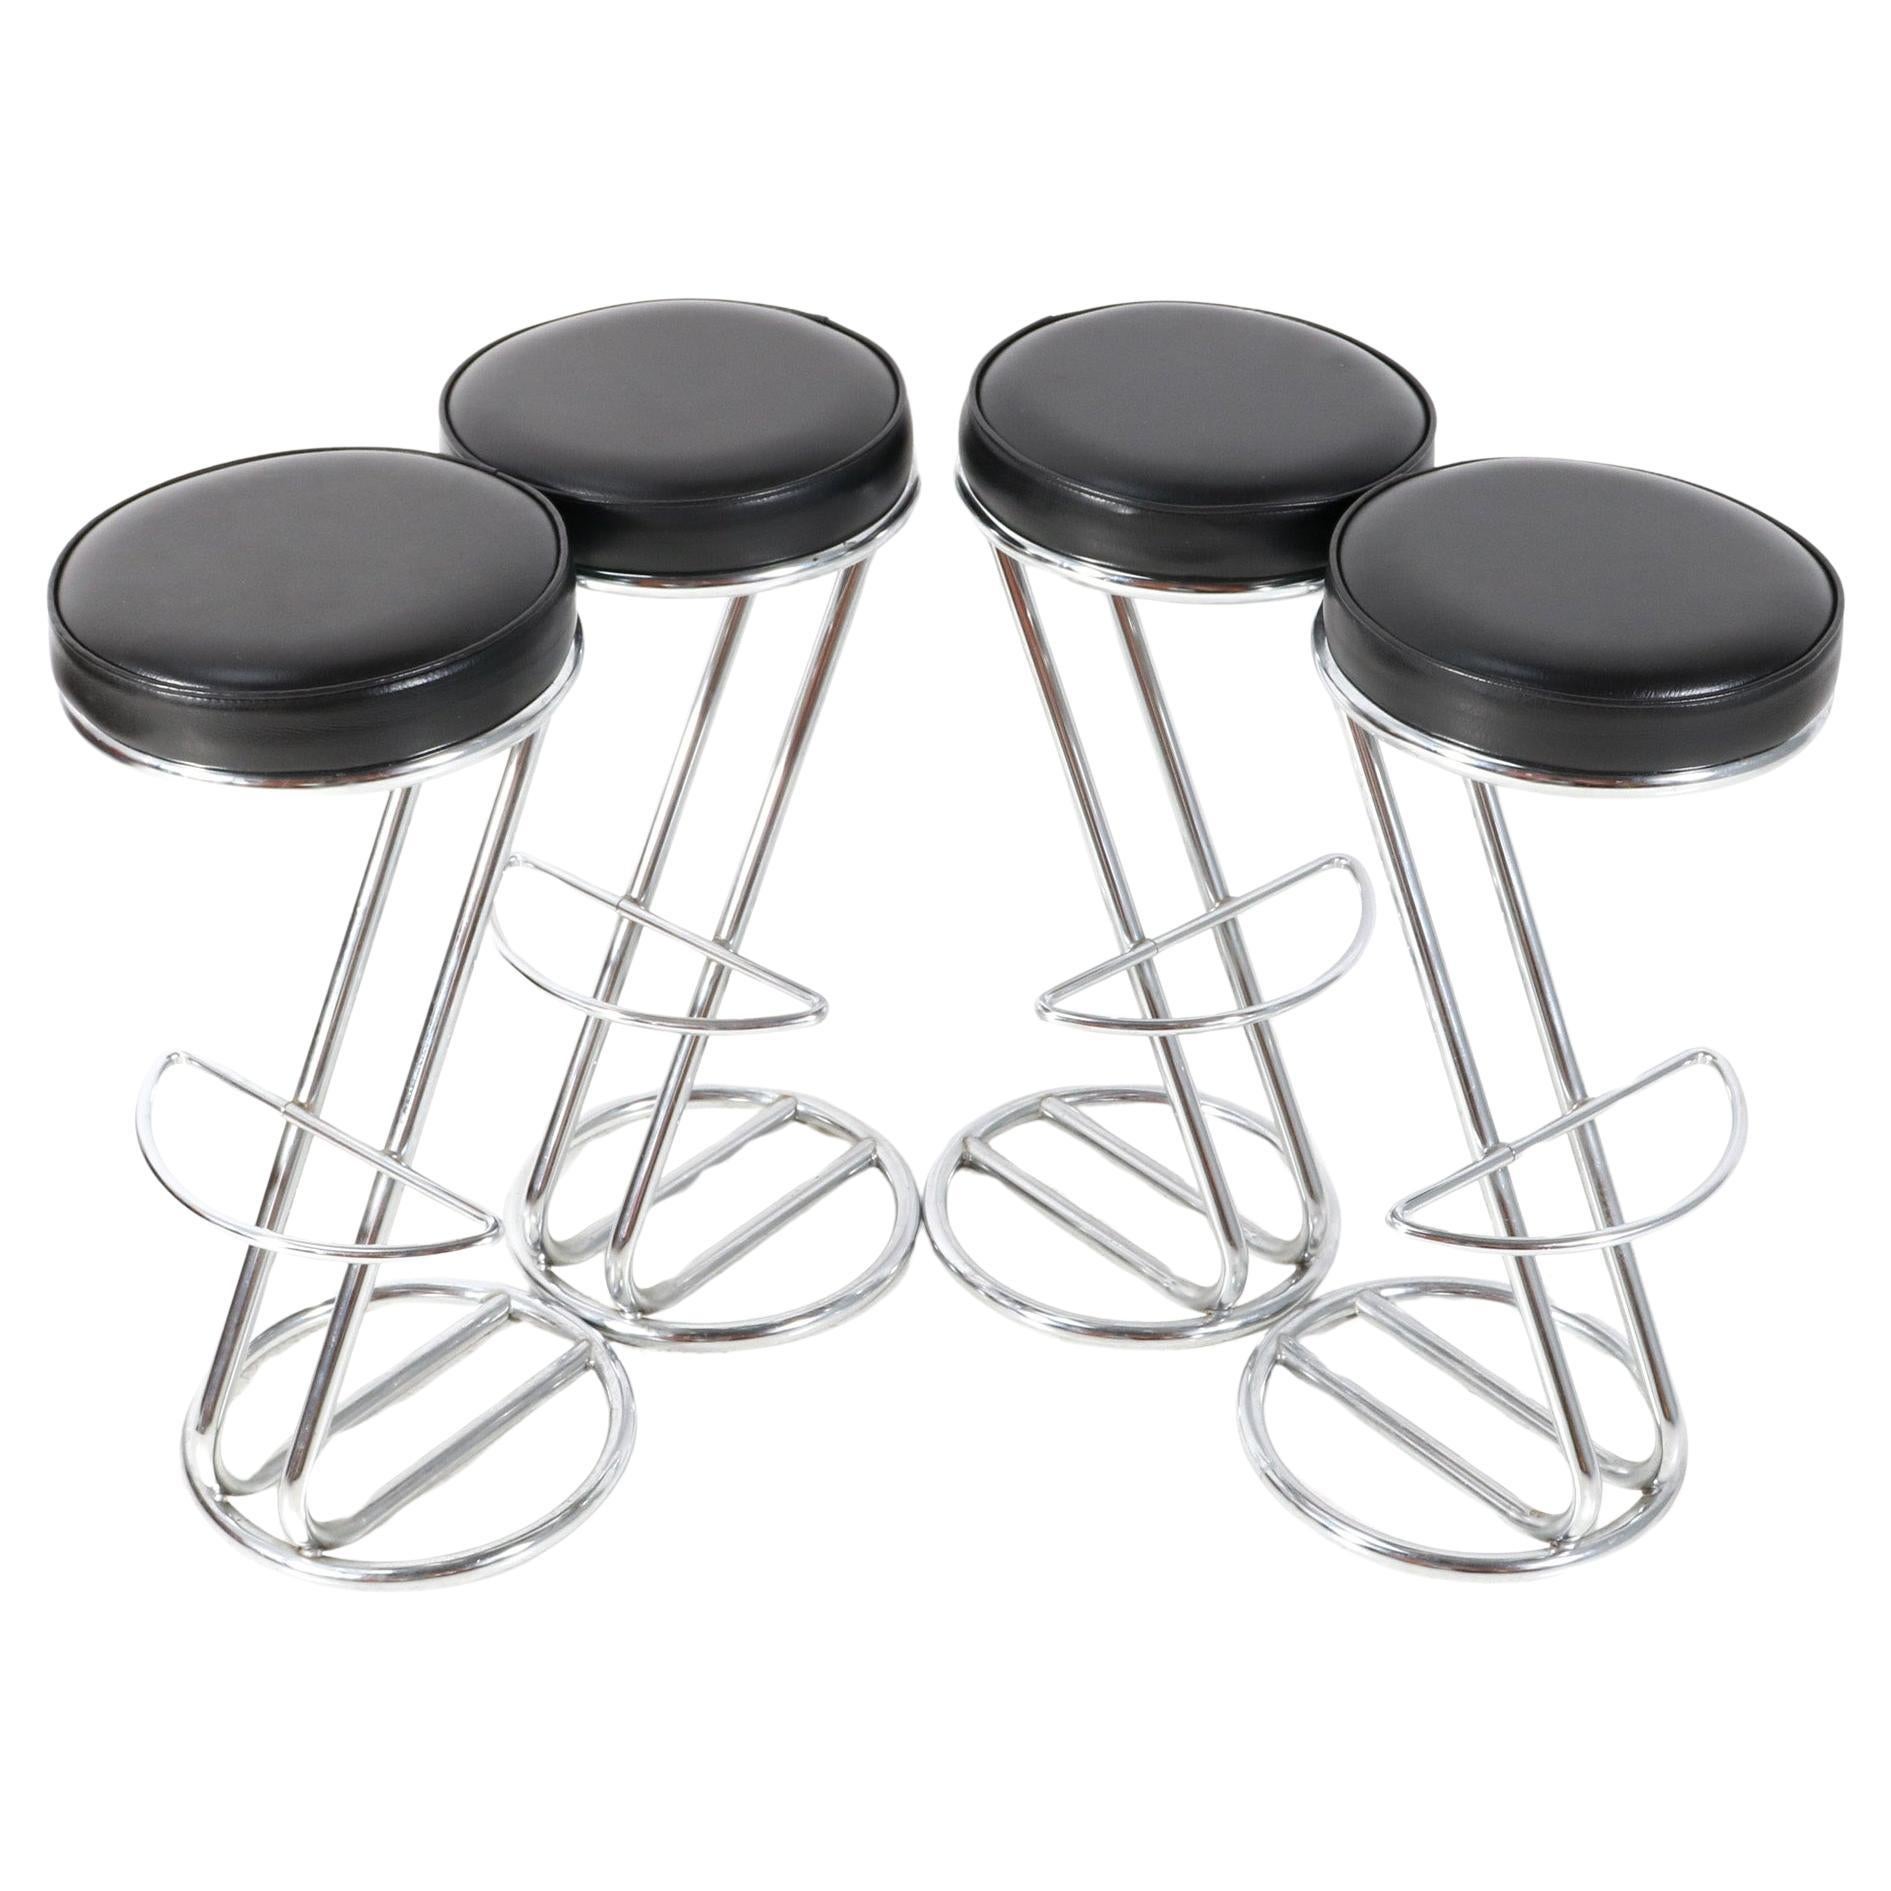 Four Chrome and Faux Leather Mid-Century Modern Barstools, 1970s